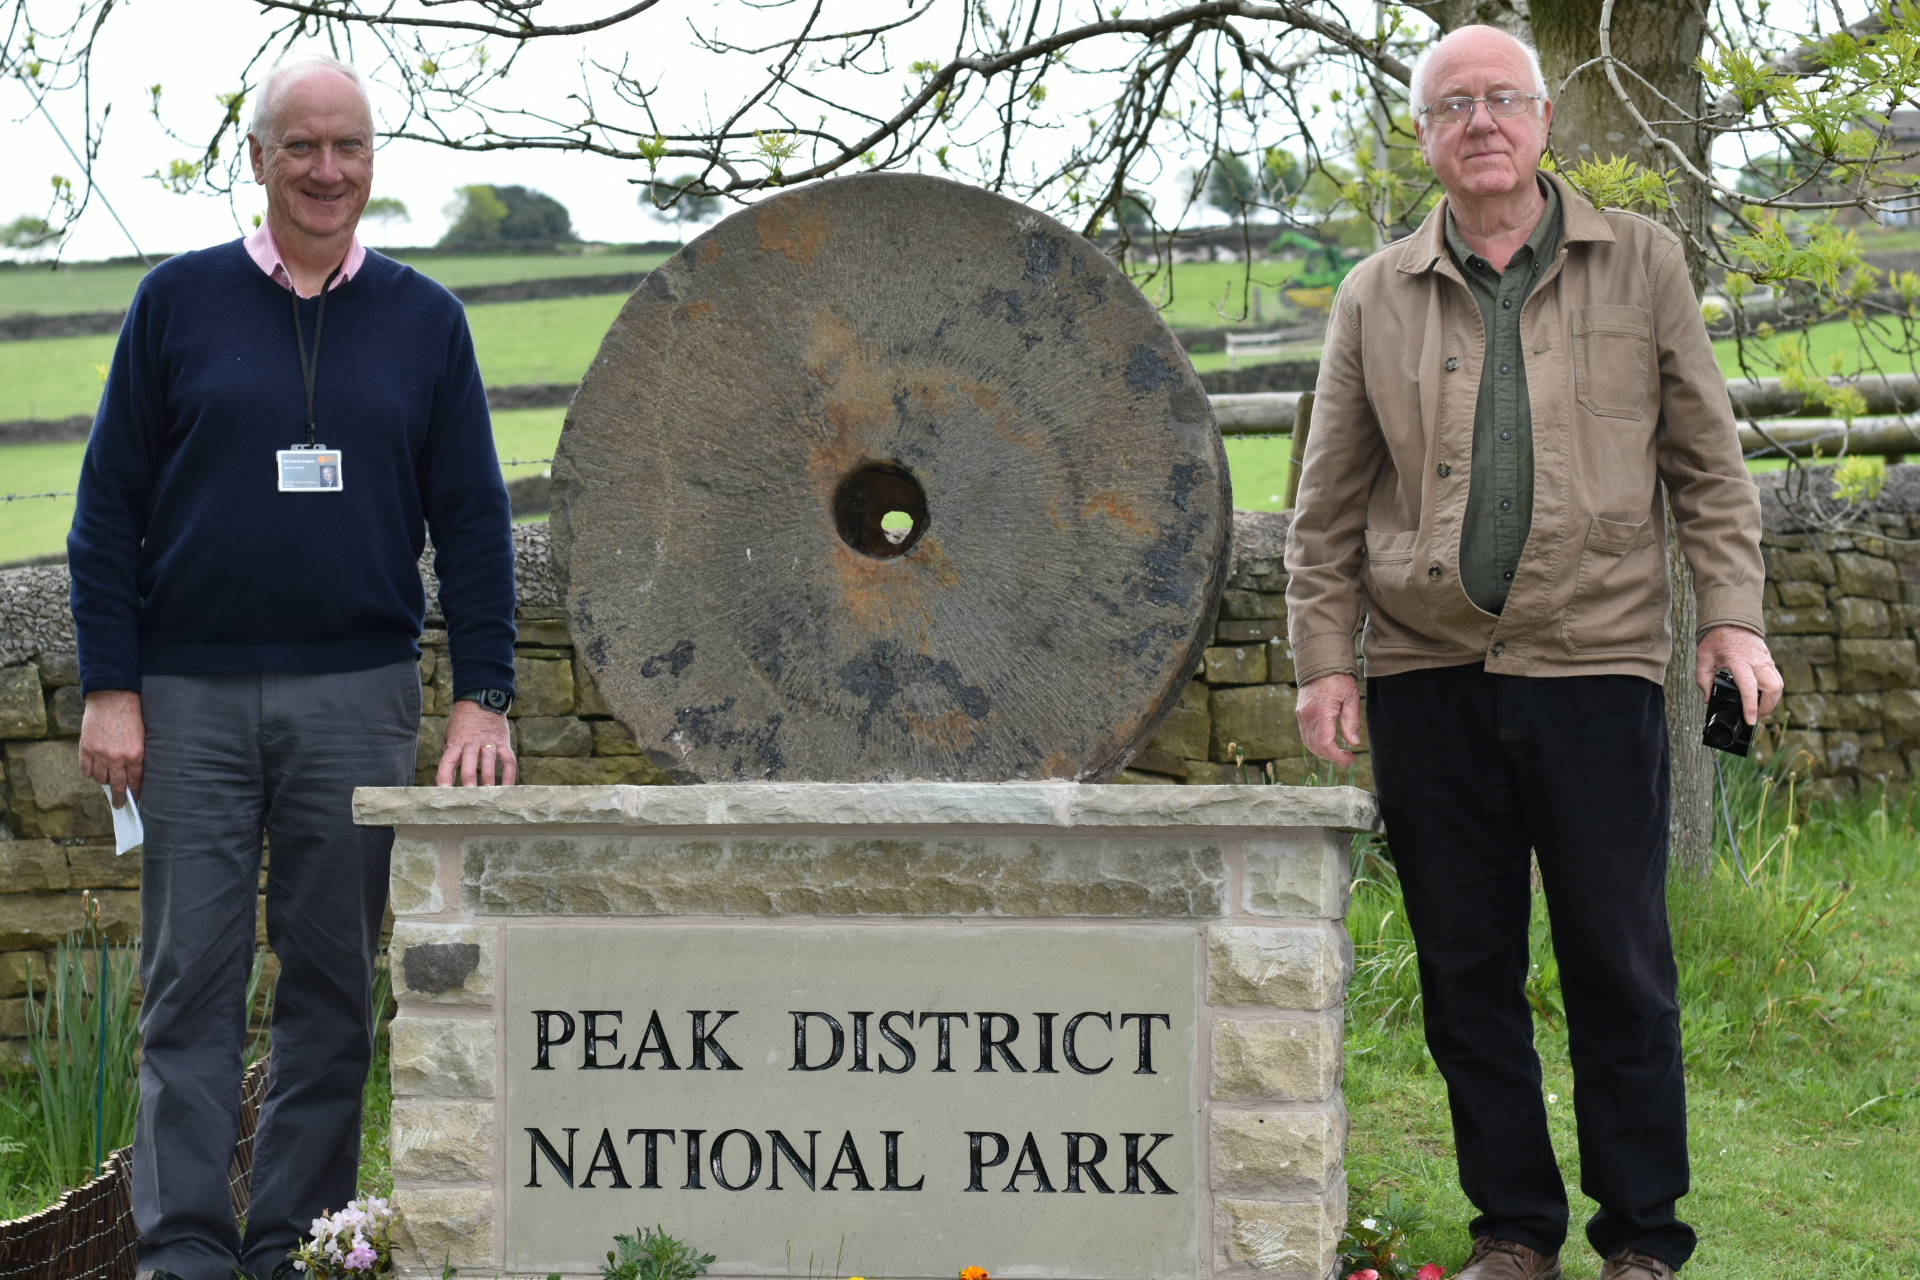 Cllr-Andrew-Gregory-and-Graham-Barrow-with-the-new-boundary-stone